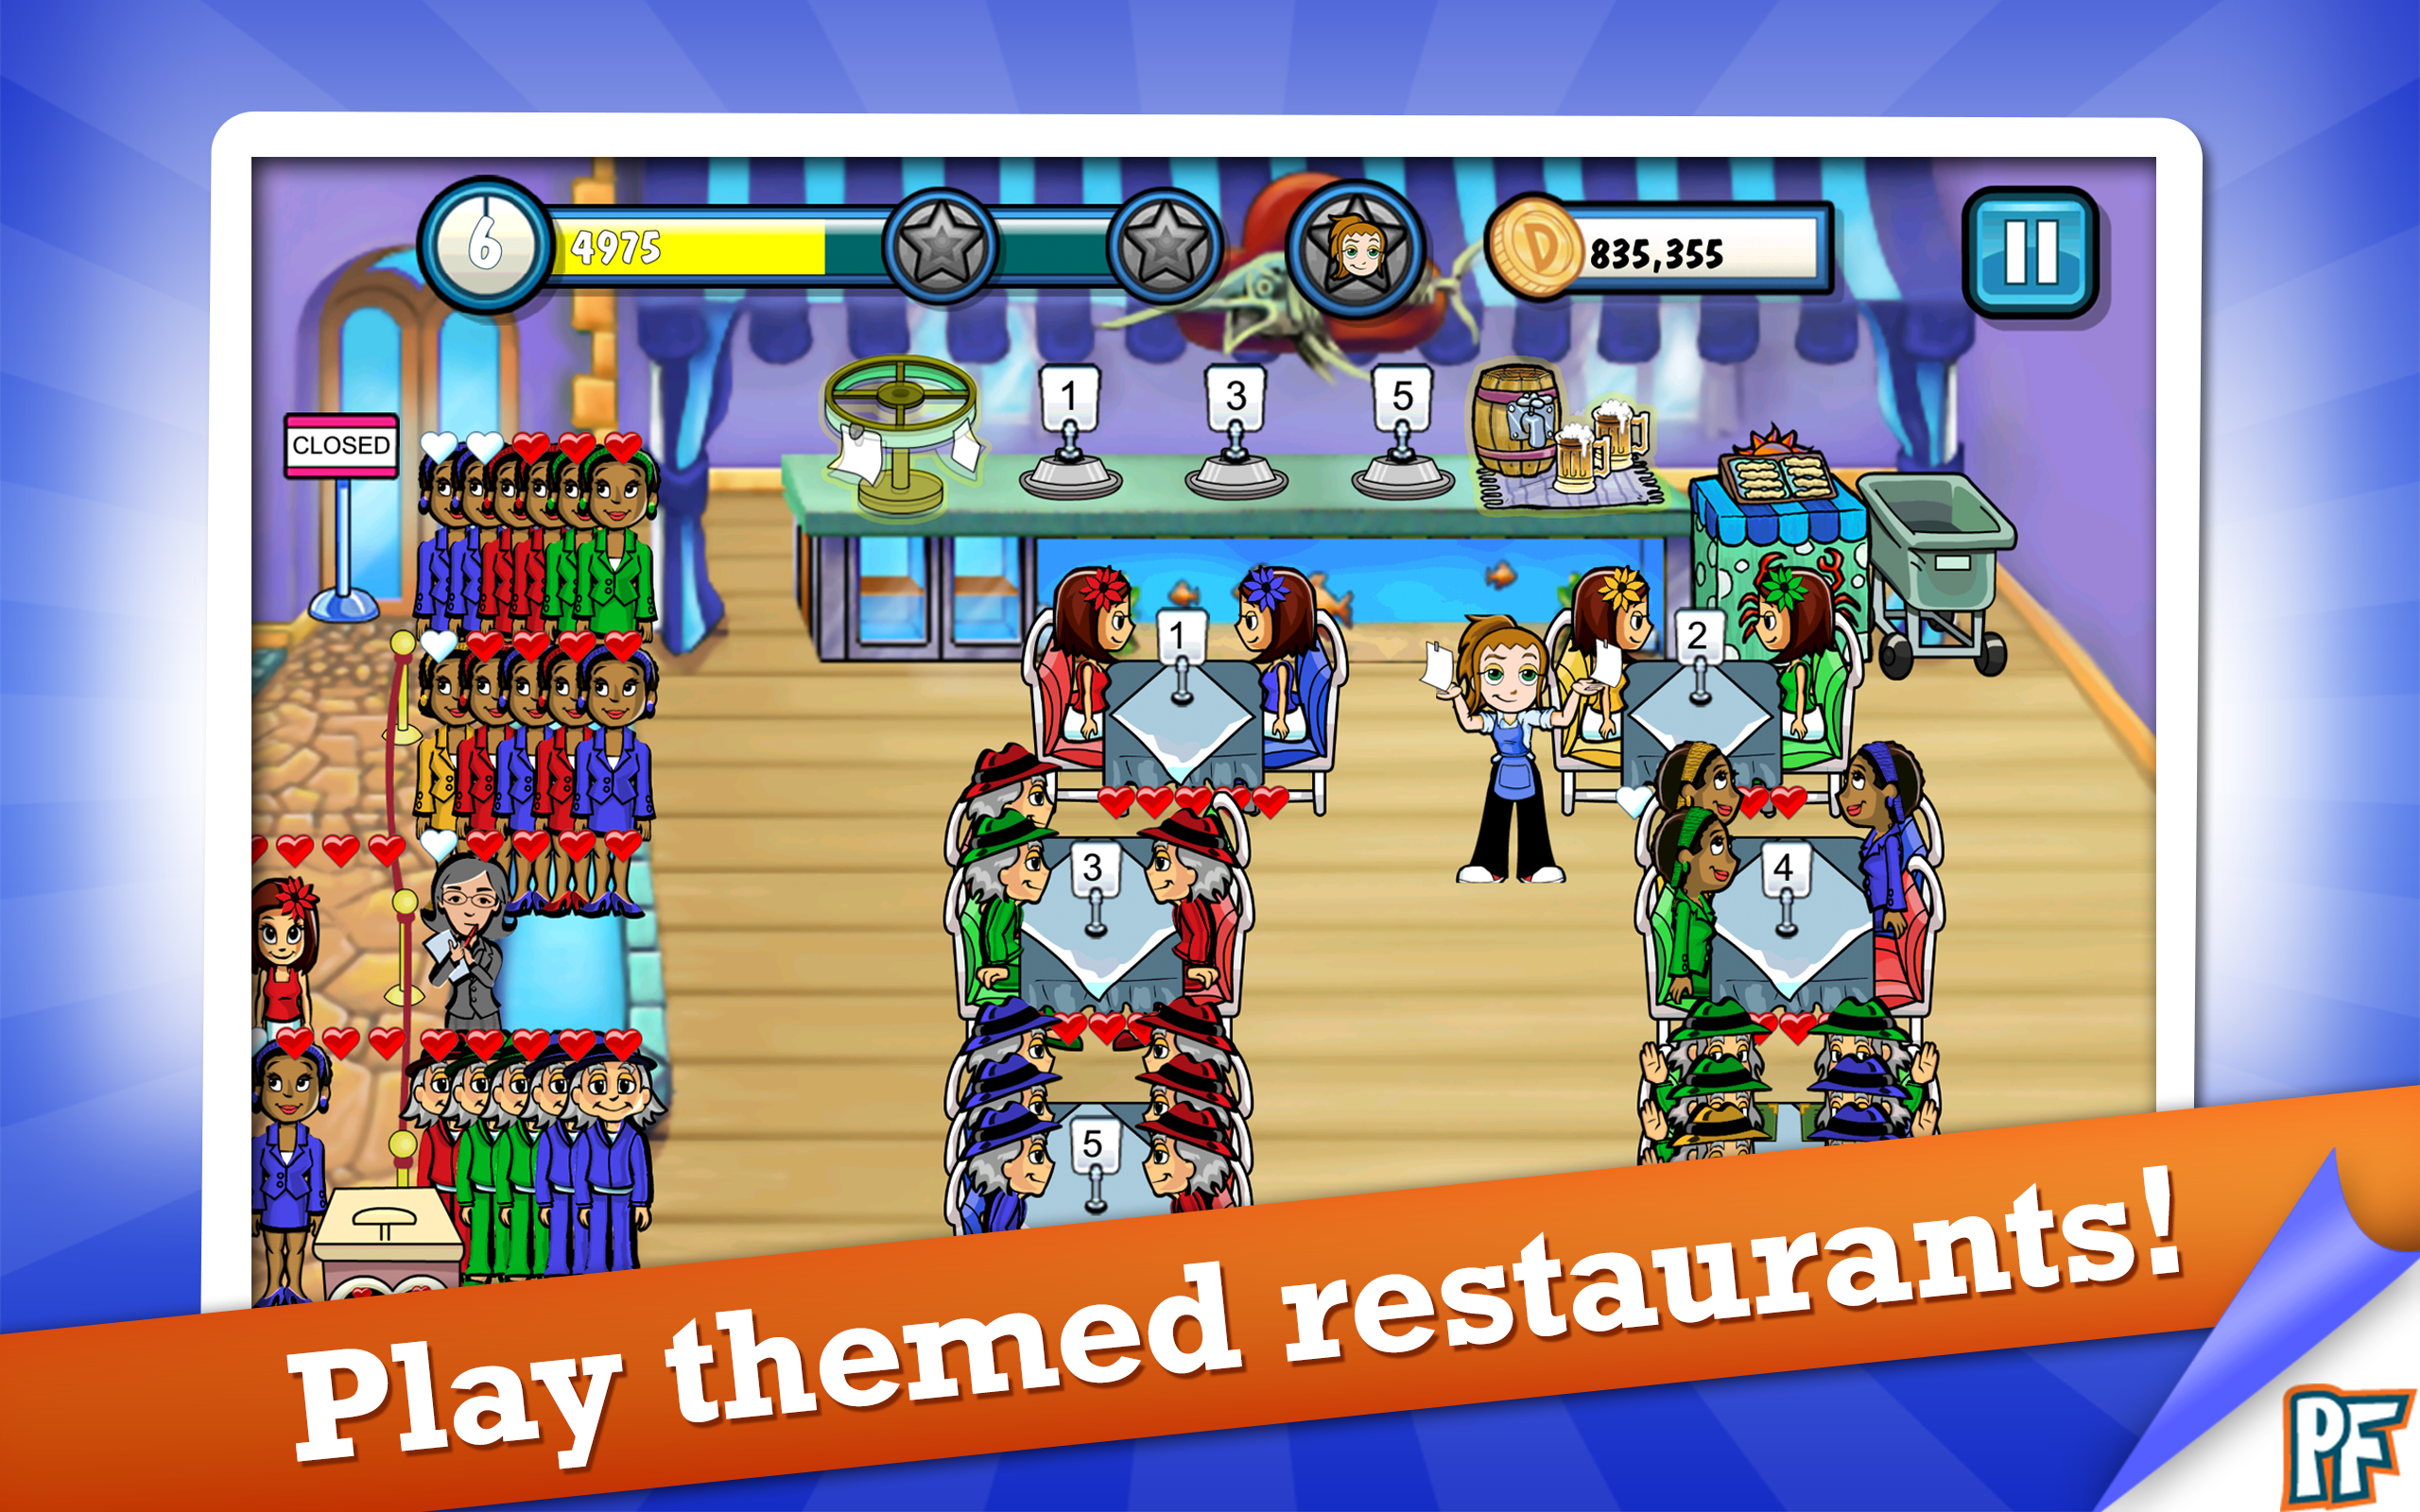 where can i download diner dash for free